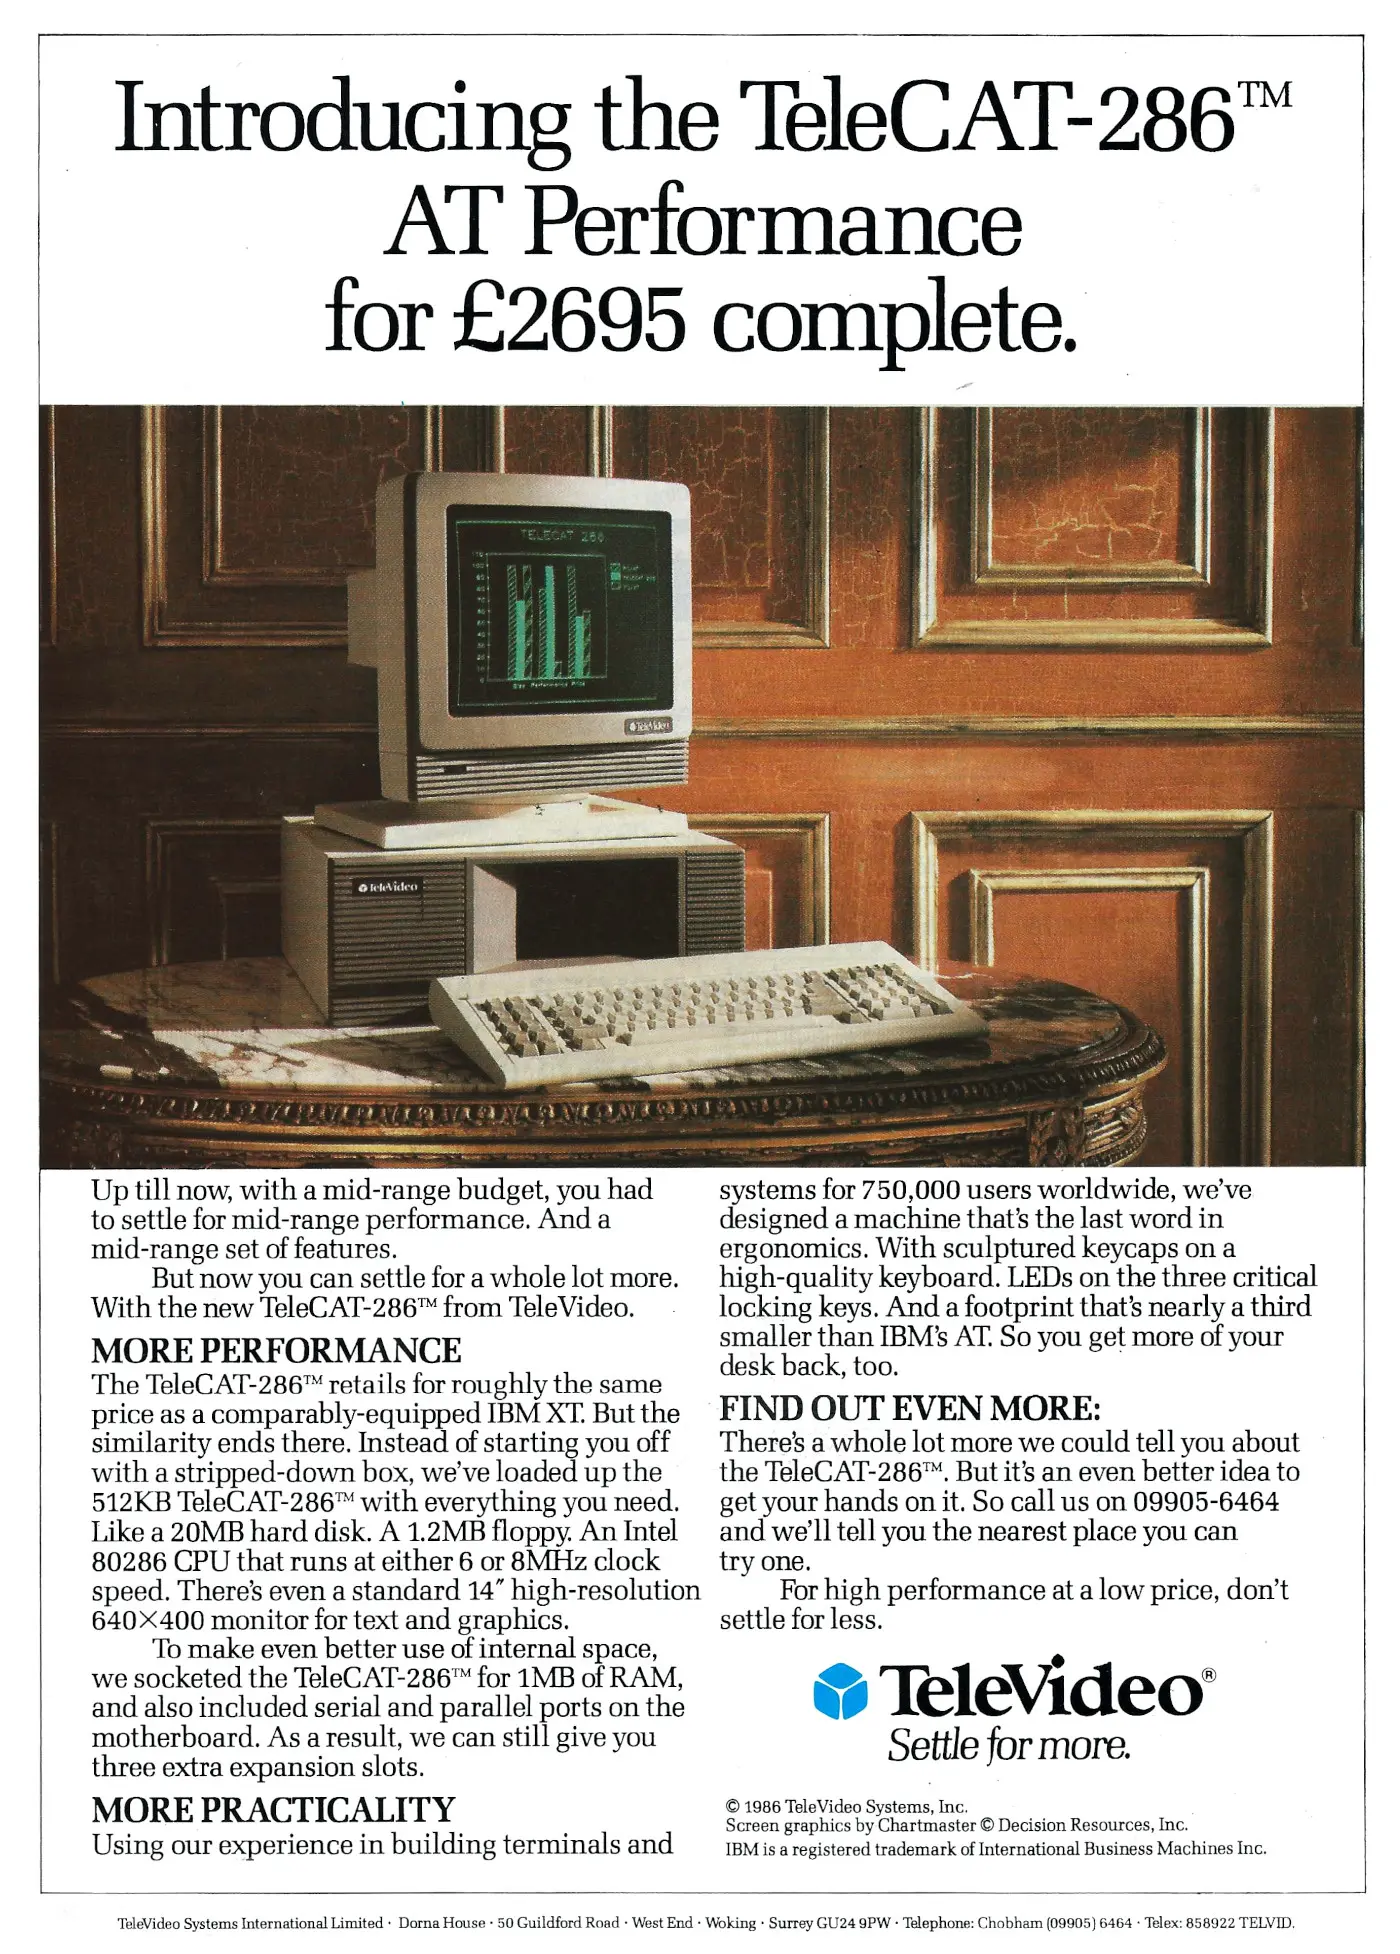 TeleVideo Advert: Introducing the TeleCAT-286. AT performance for £2695 complete., from Practical Computing, August 1986